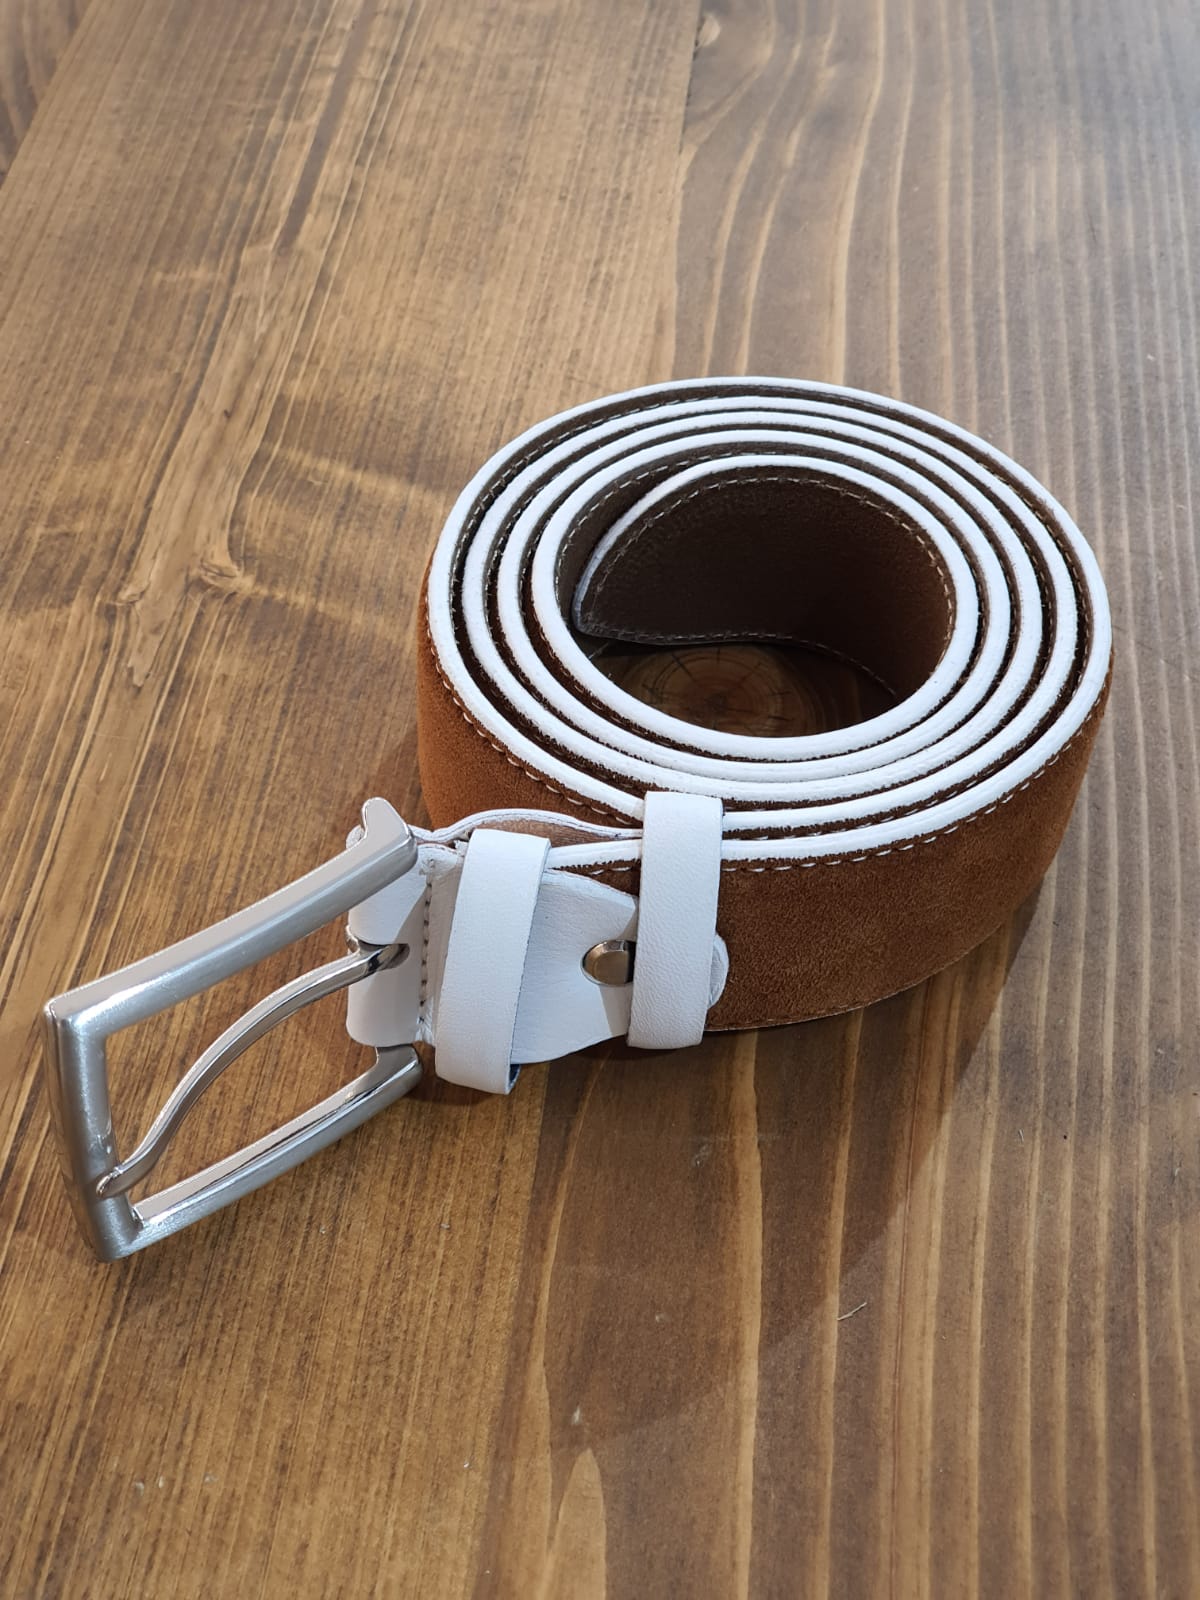 GentWith Bellingham Cinnamon Suede Leather Belt - GENT WITH